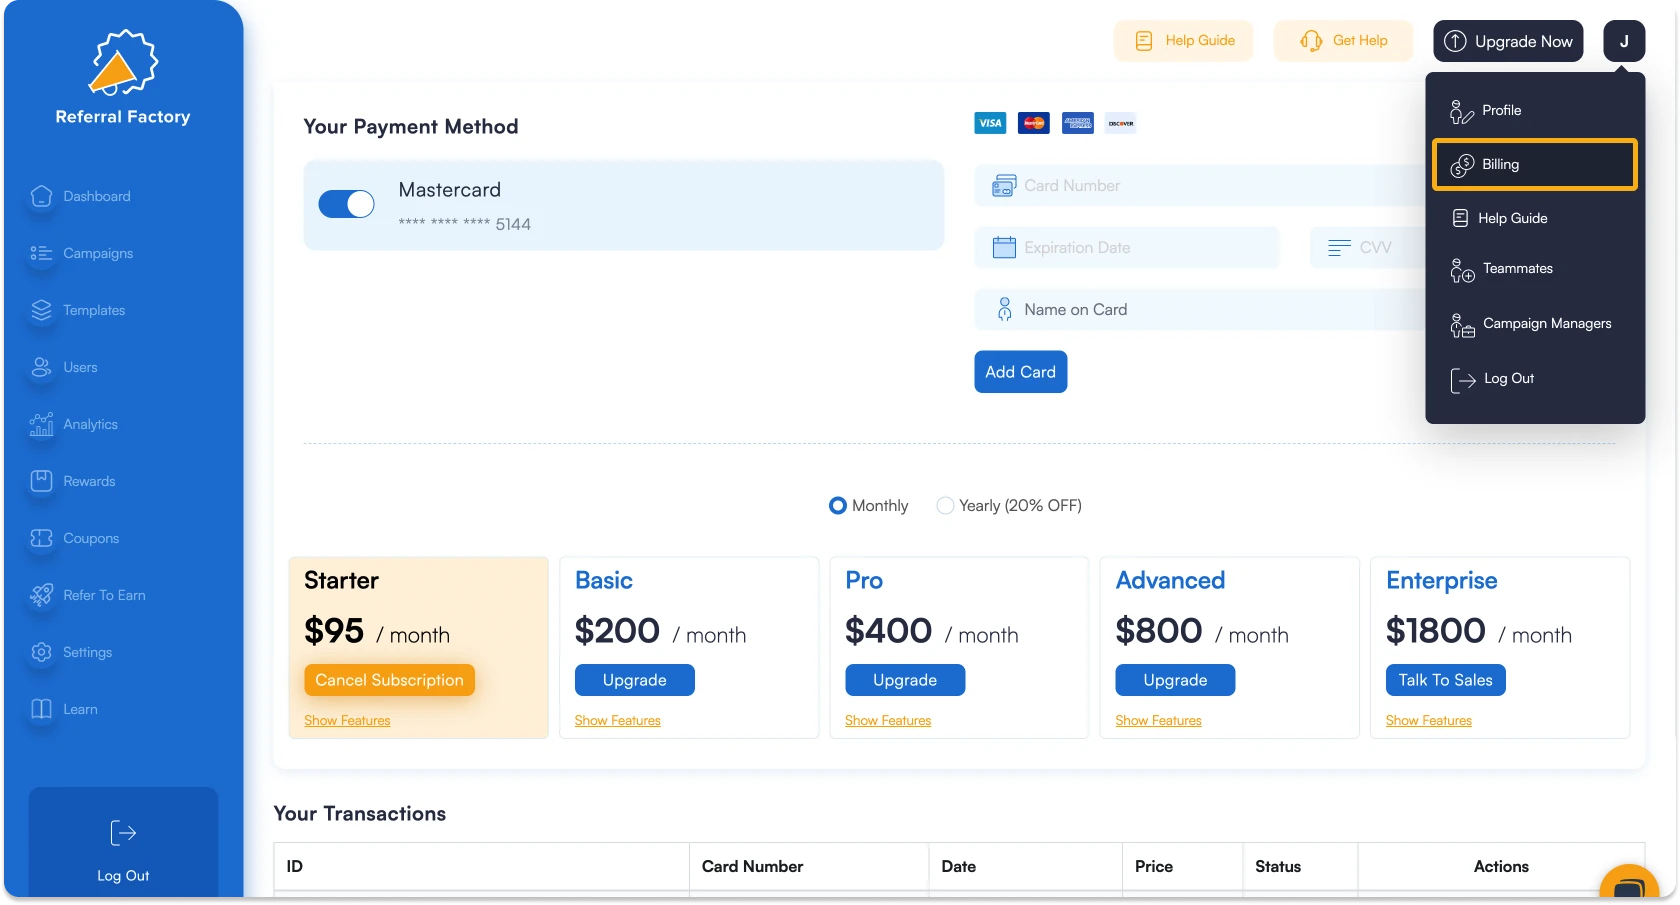 Screenshot of the Referral Factory billing page showing the option to upgrade your referral program software